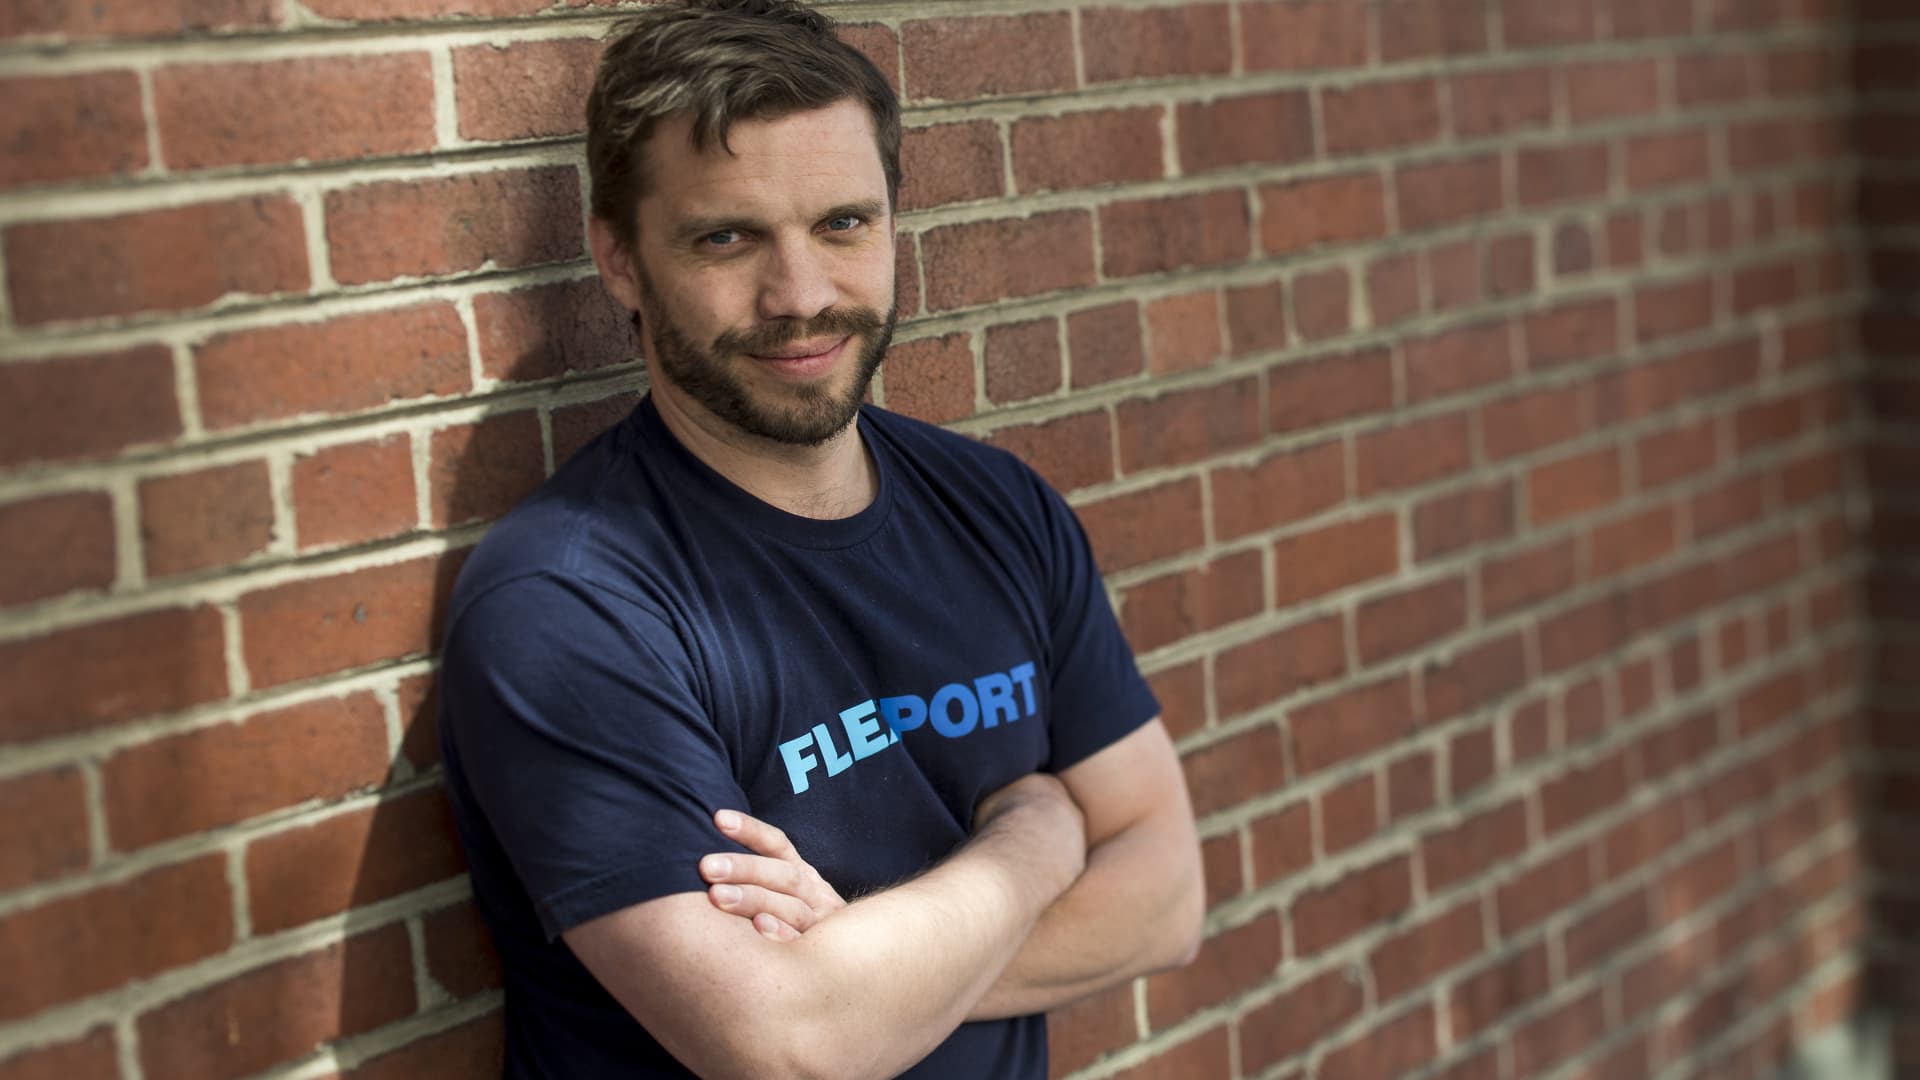 Flexport loses CFO, HR chief weeks after ouster of CEO Dave Clark